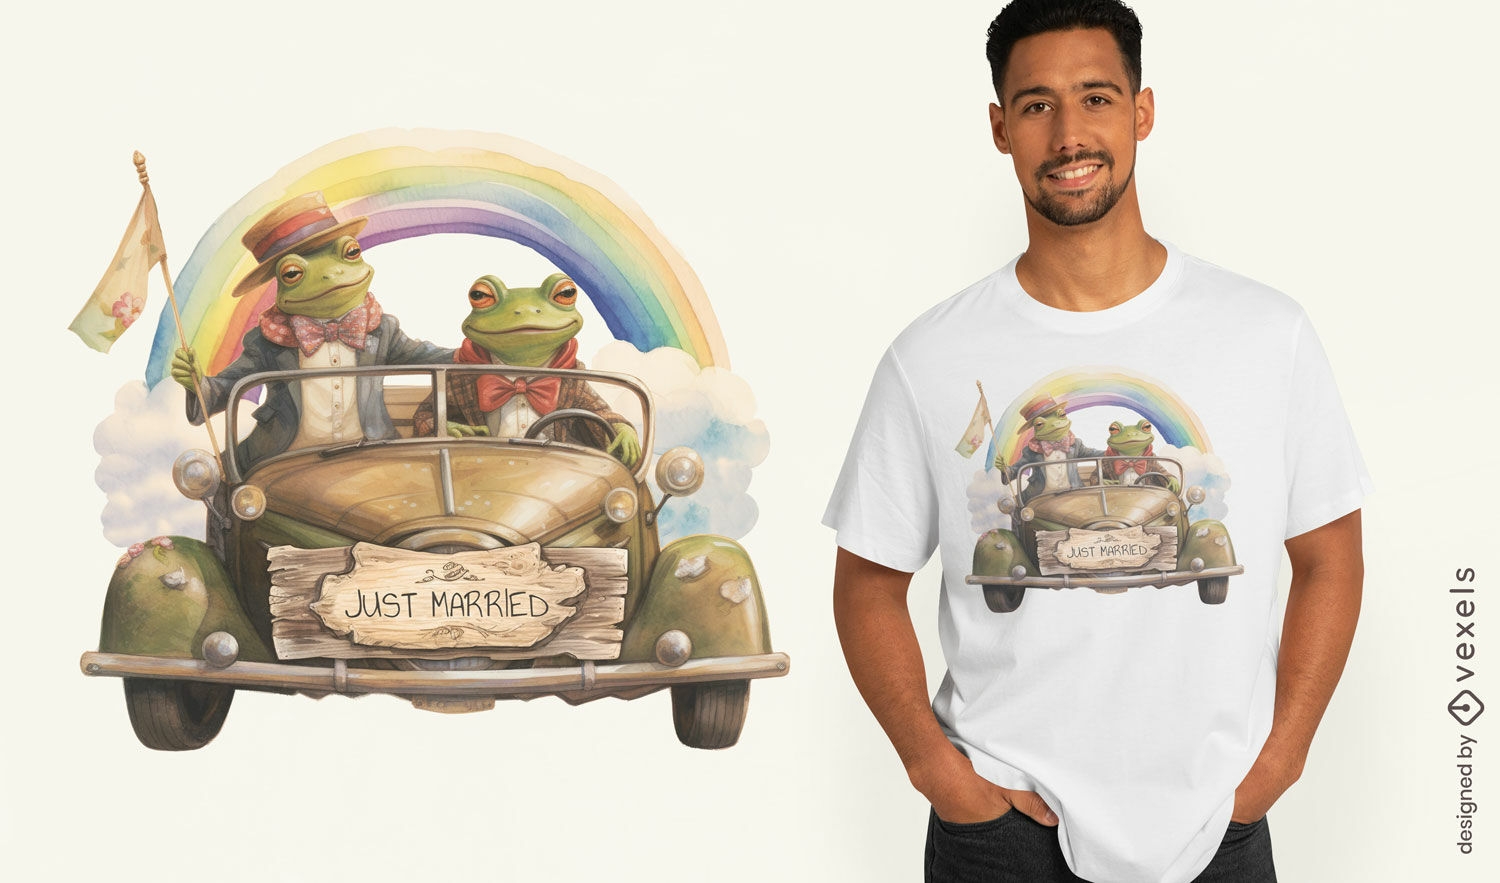 Just married frog t-shirt design